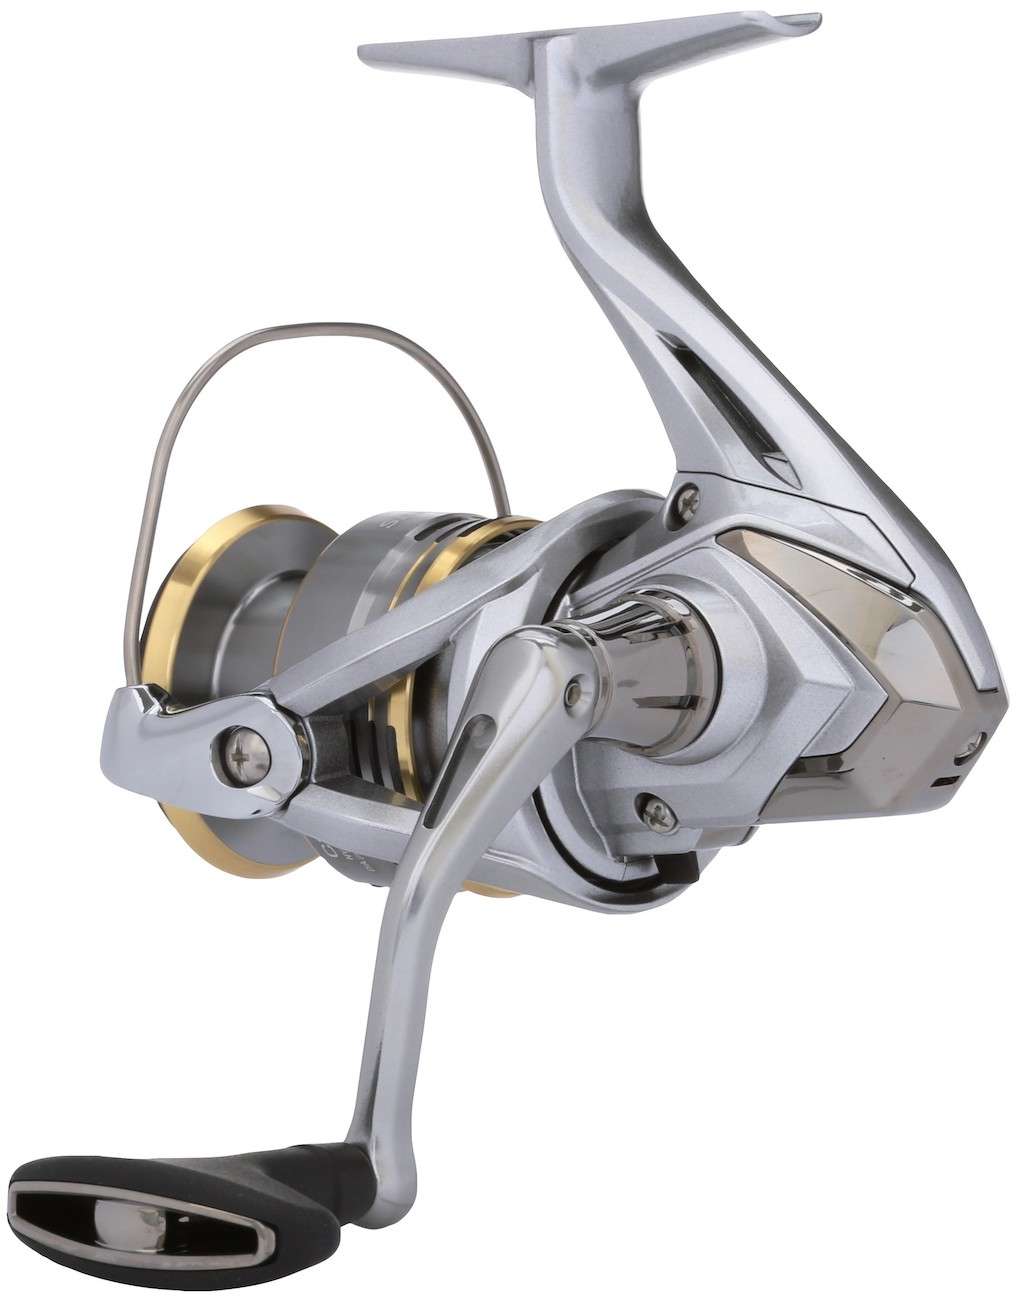 Shimano Saltwater Fishing Reels for Sale - TackleDirect